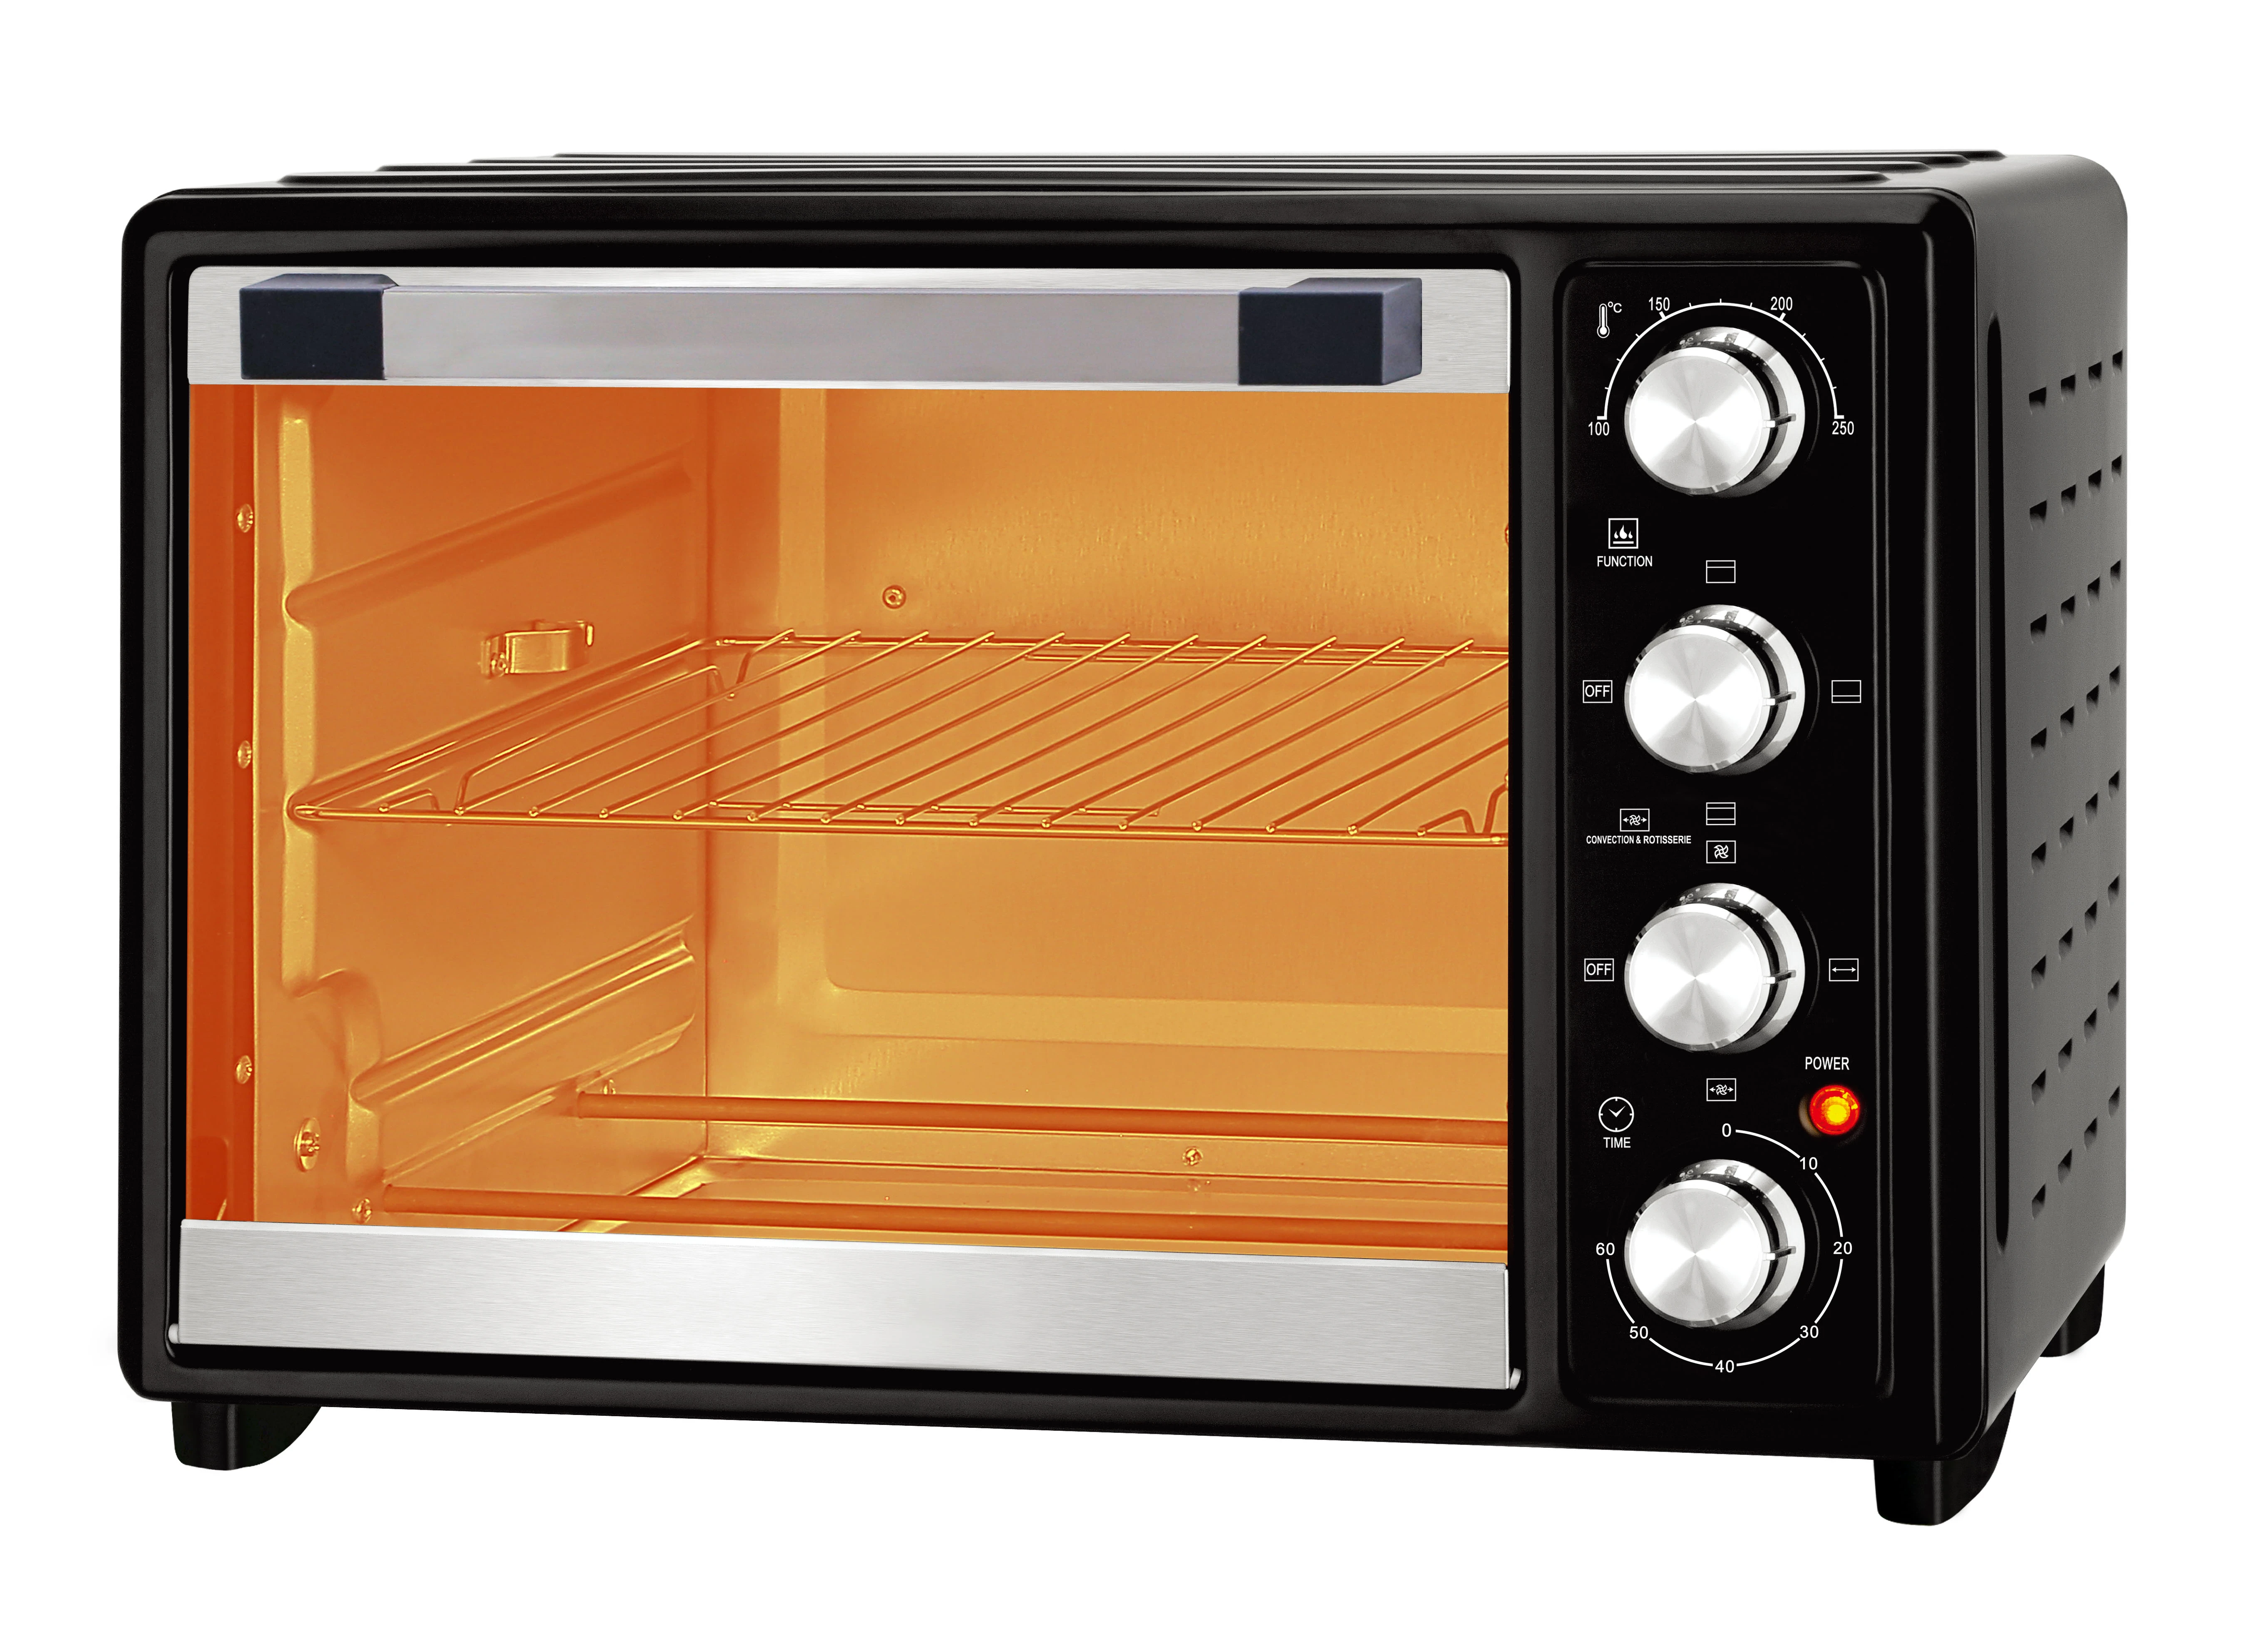 Electric home baking Oven, 24L oven